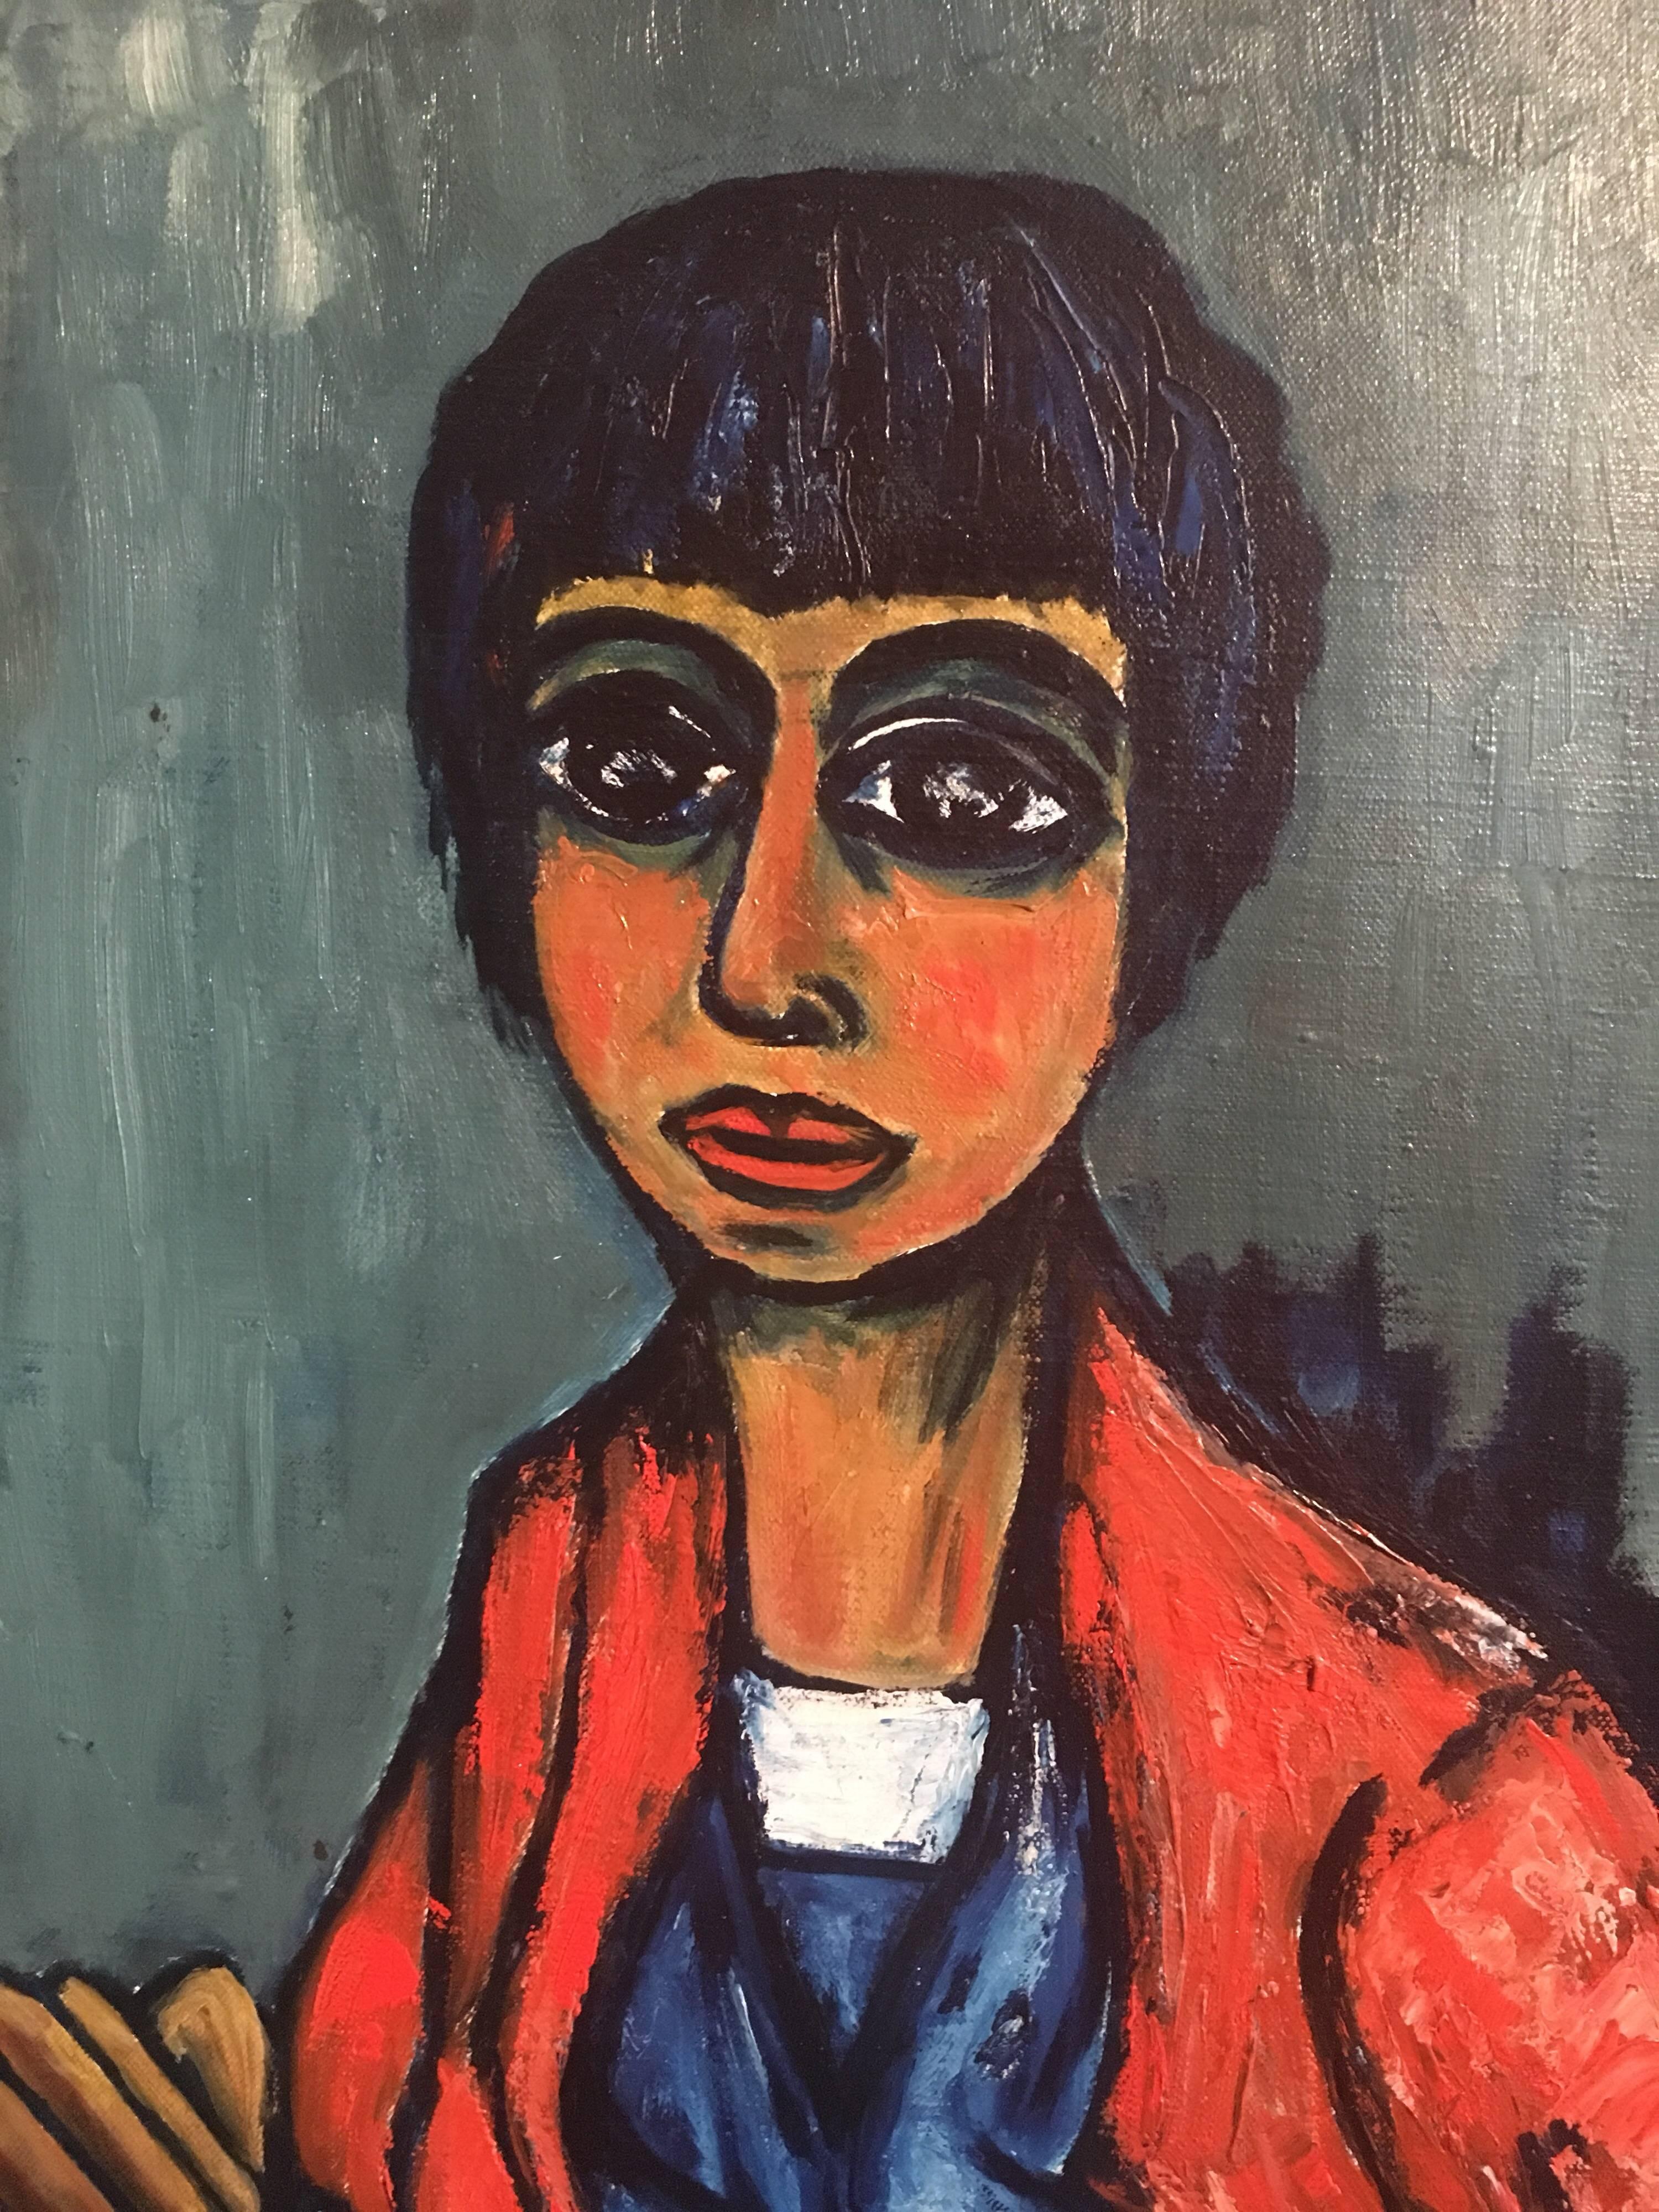 Portrait of a Stylish Lady
French School, Mid 20th Century
Oil painting on canvas, framed
Signed by the artist on the lower right hand corner
Frame size: 26.5 x 22 inches

Stylish expressionist French painting of a wide eyed lady - so typical of the